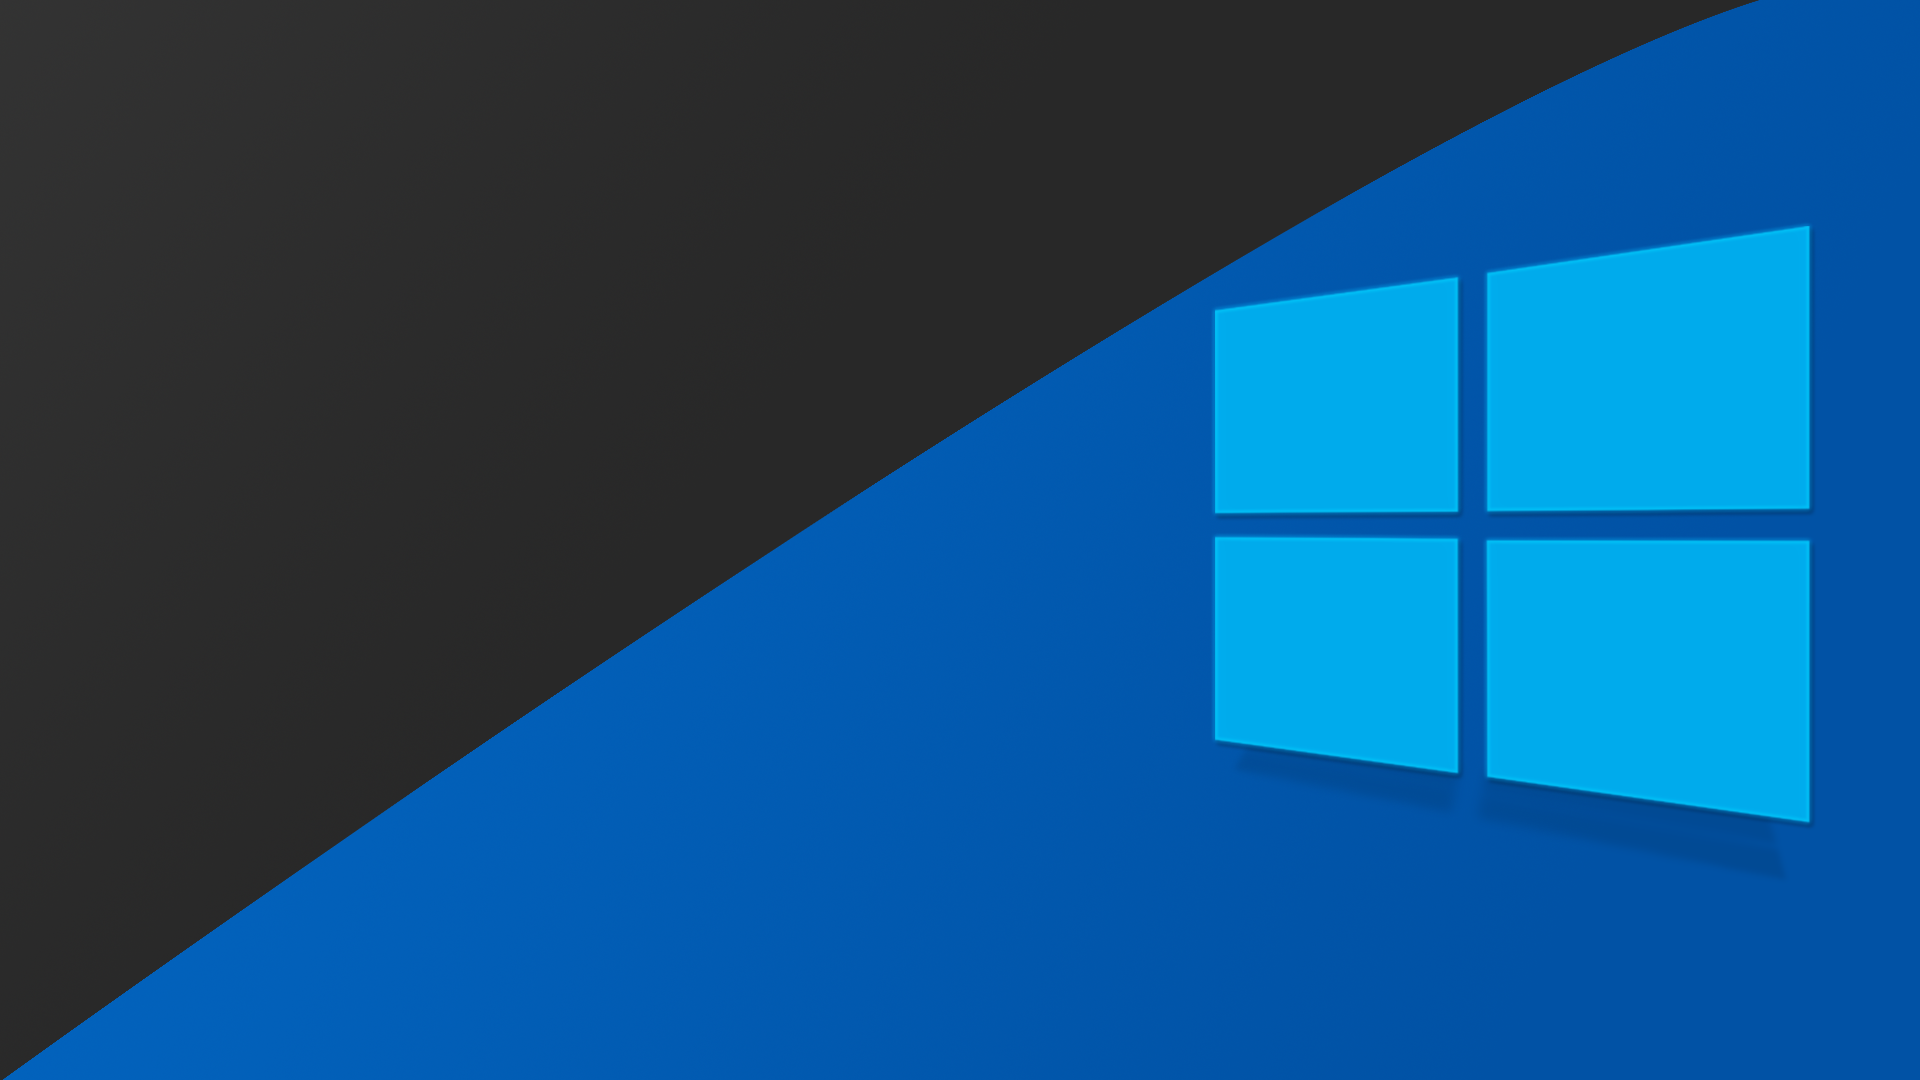 Blue Color Windows Logo 4k Hd Technology Wallpapers Hd Wallpapers Images